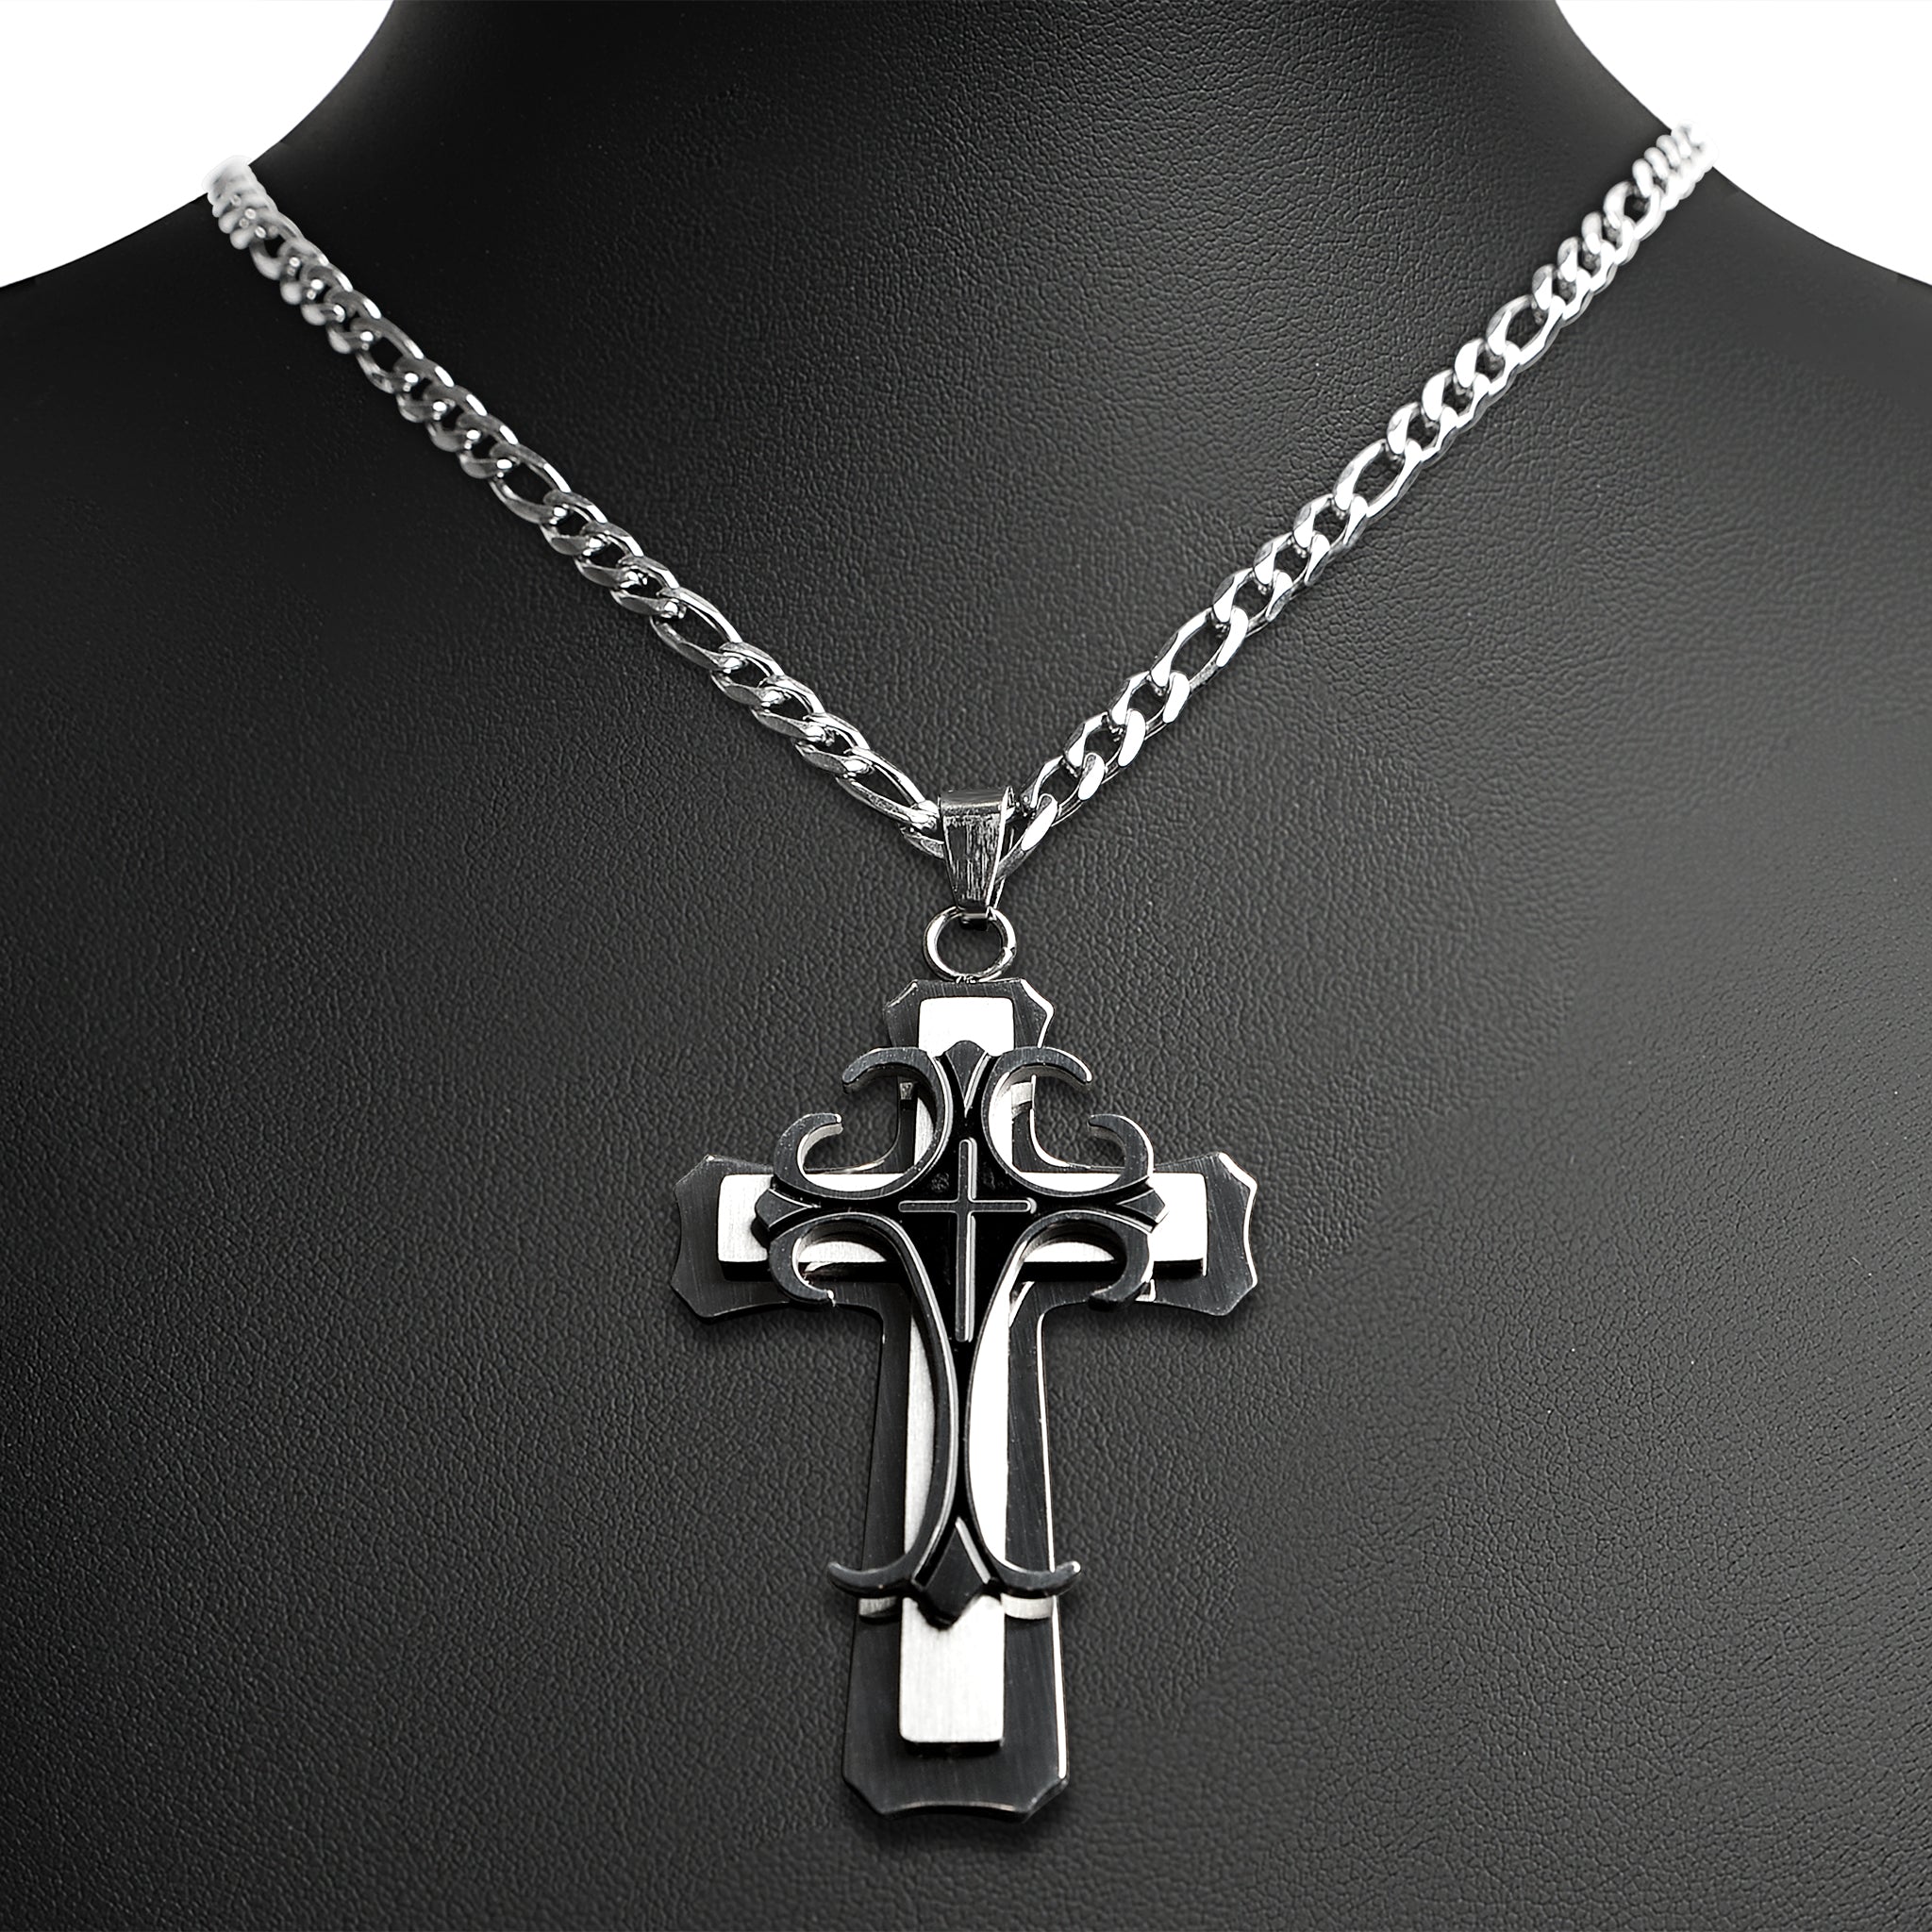 Necklaces Black Stainless Steel Byzantine Chain Necklace Chn8505 6mm / 24 Wholesale Jewelry Website Unisex